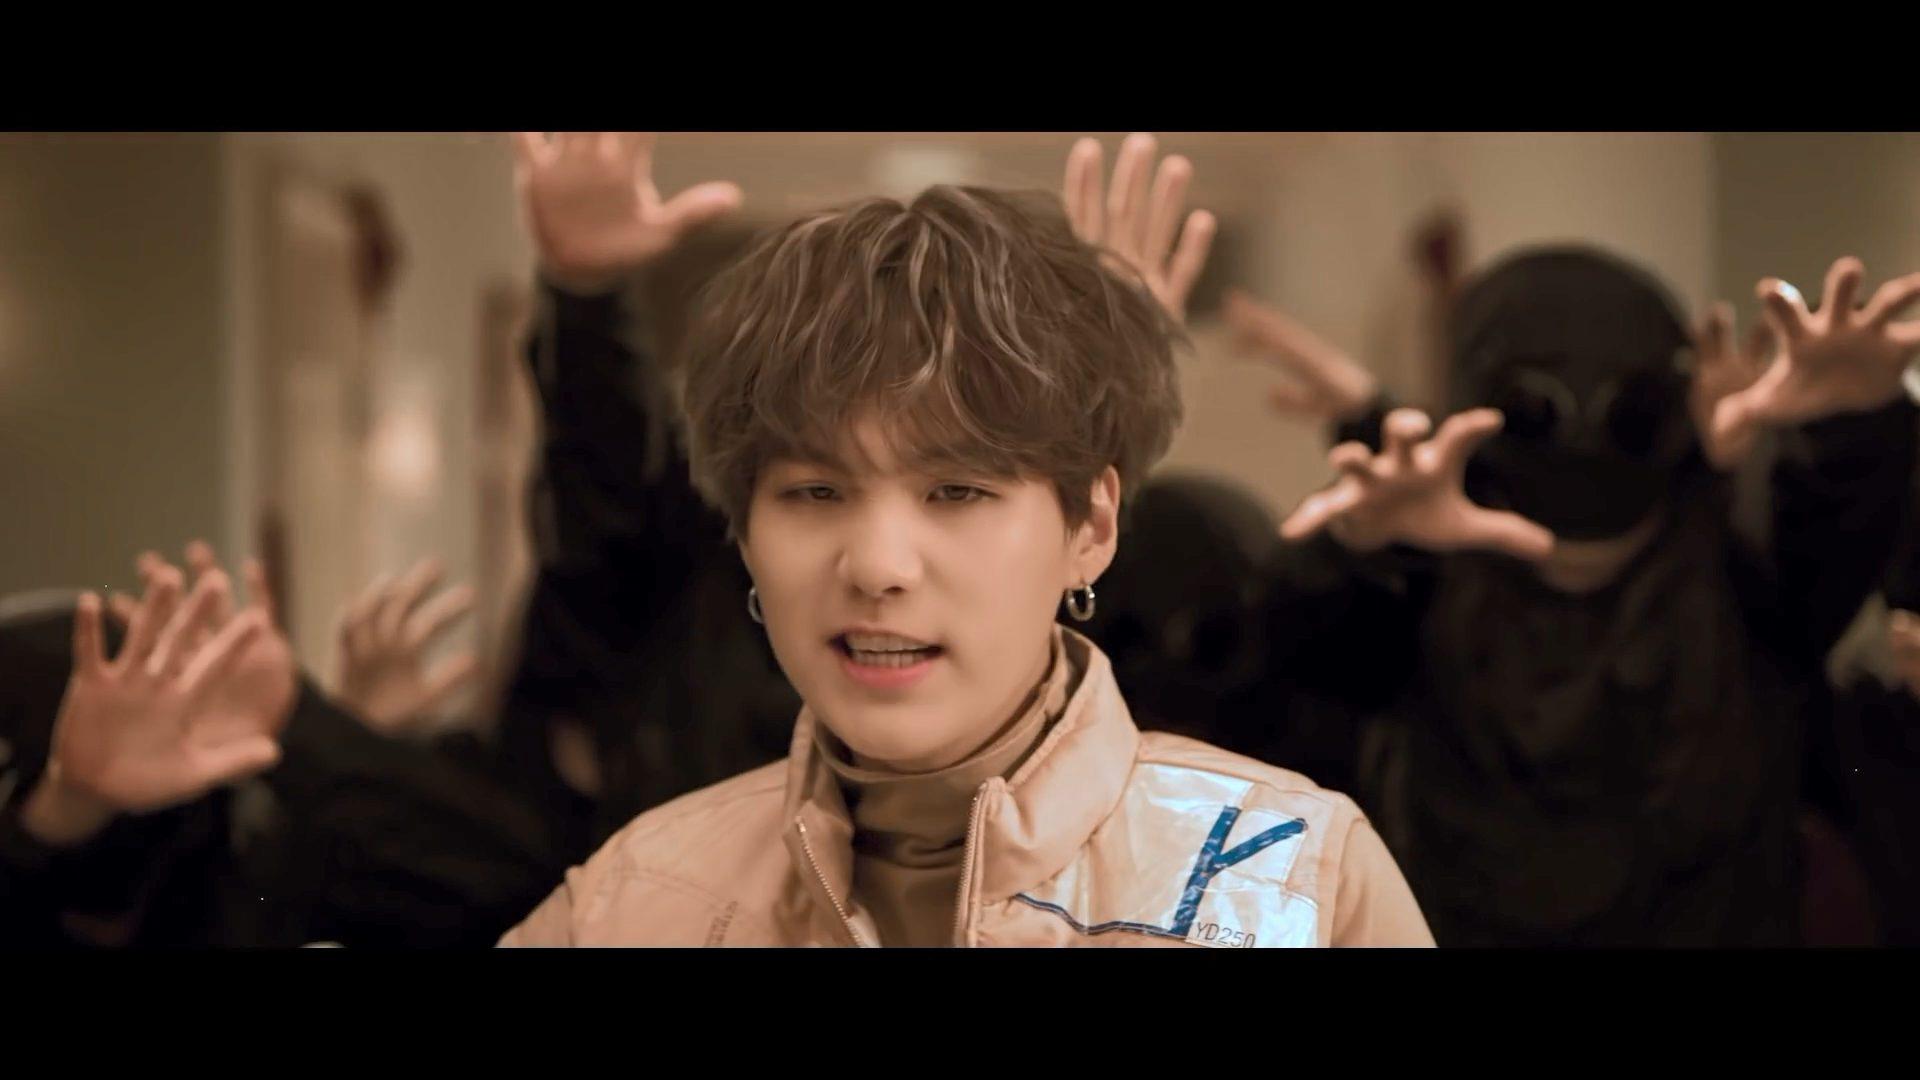 BTS' Suga Depicts the Struggles that Come Along with Fame in